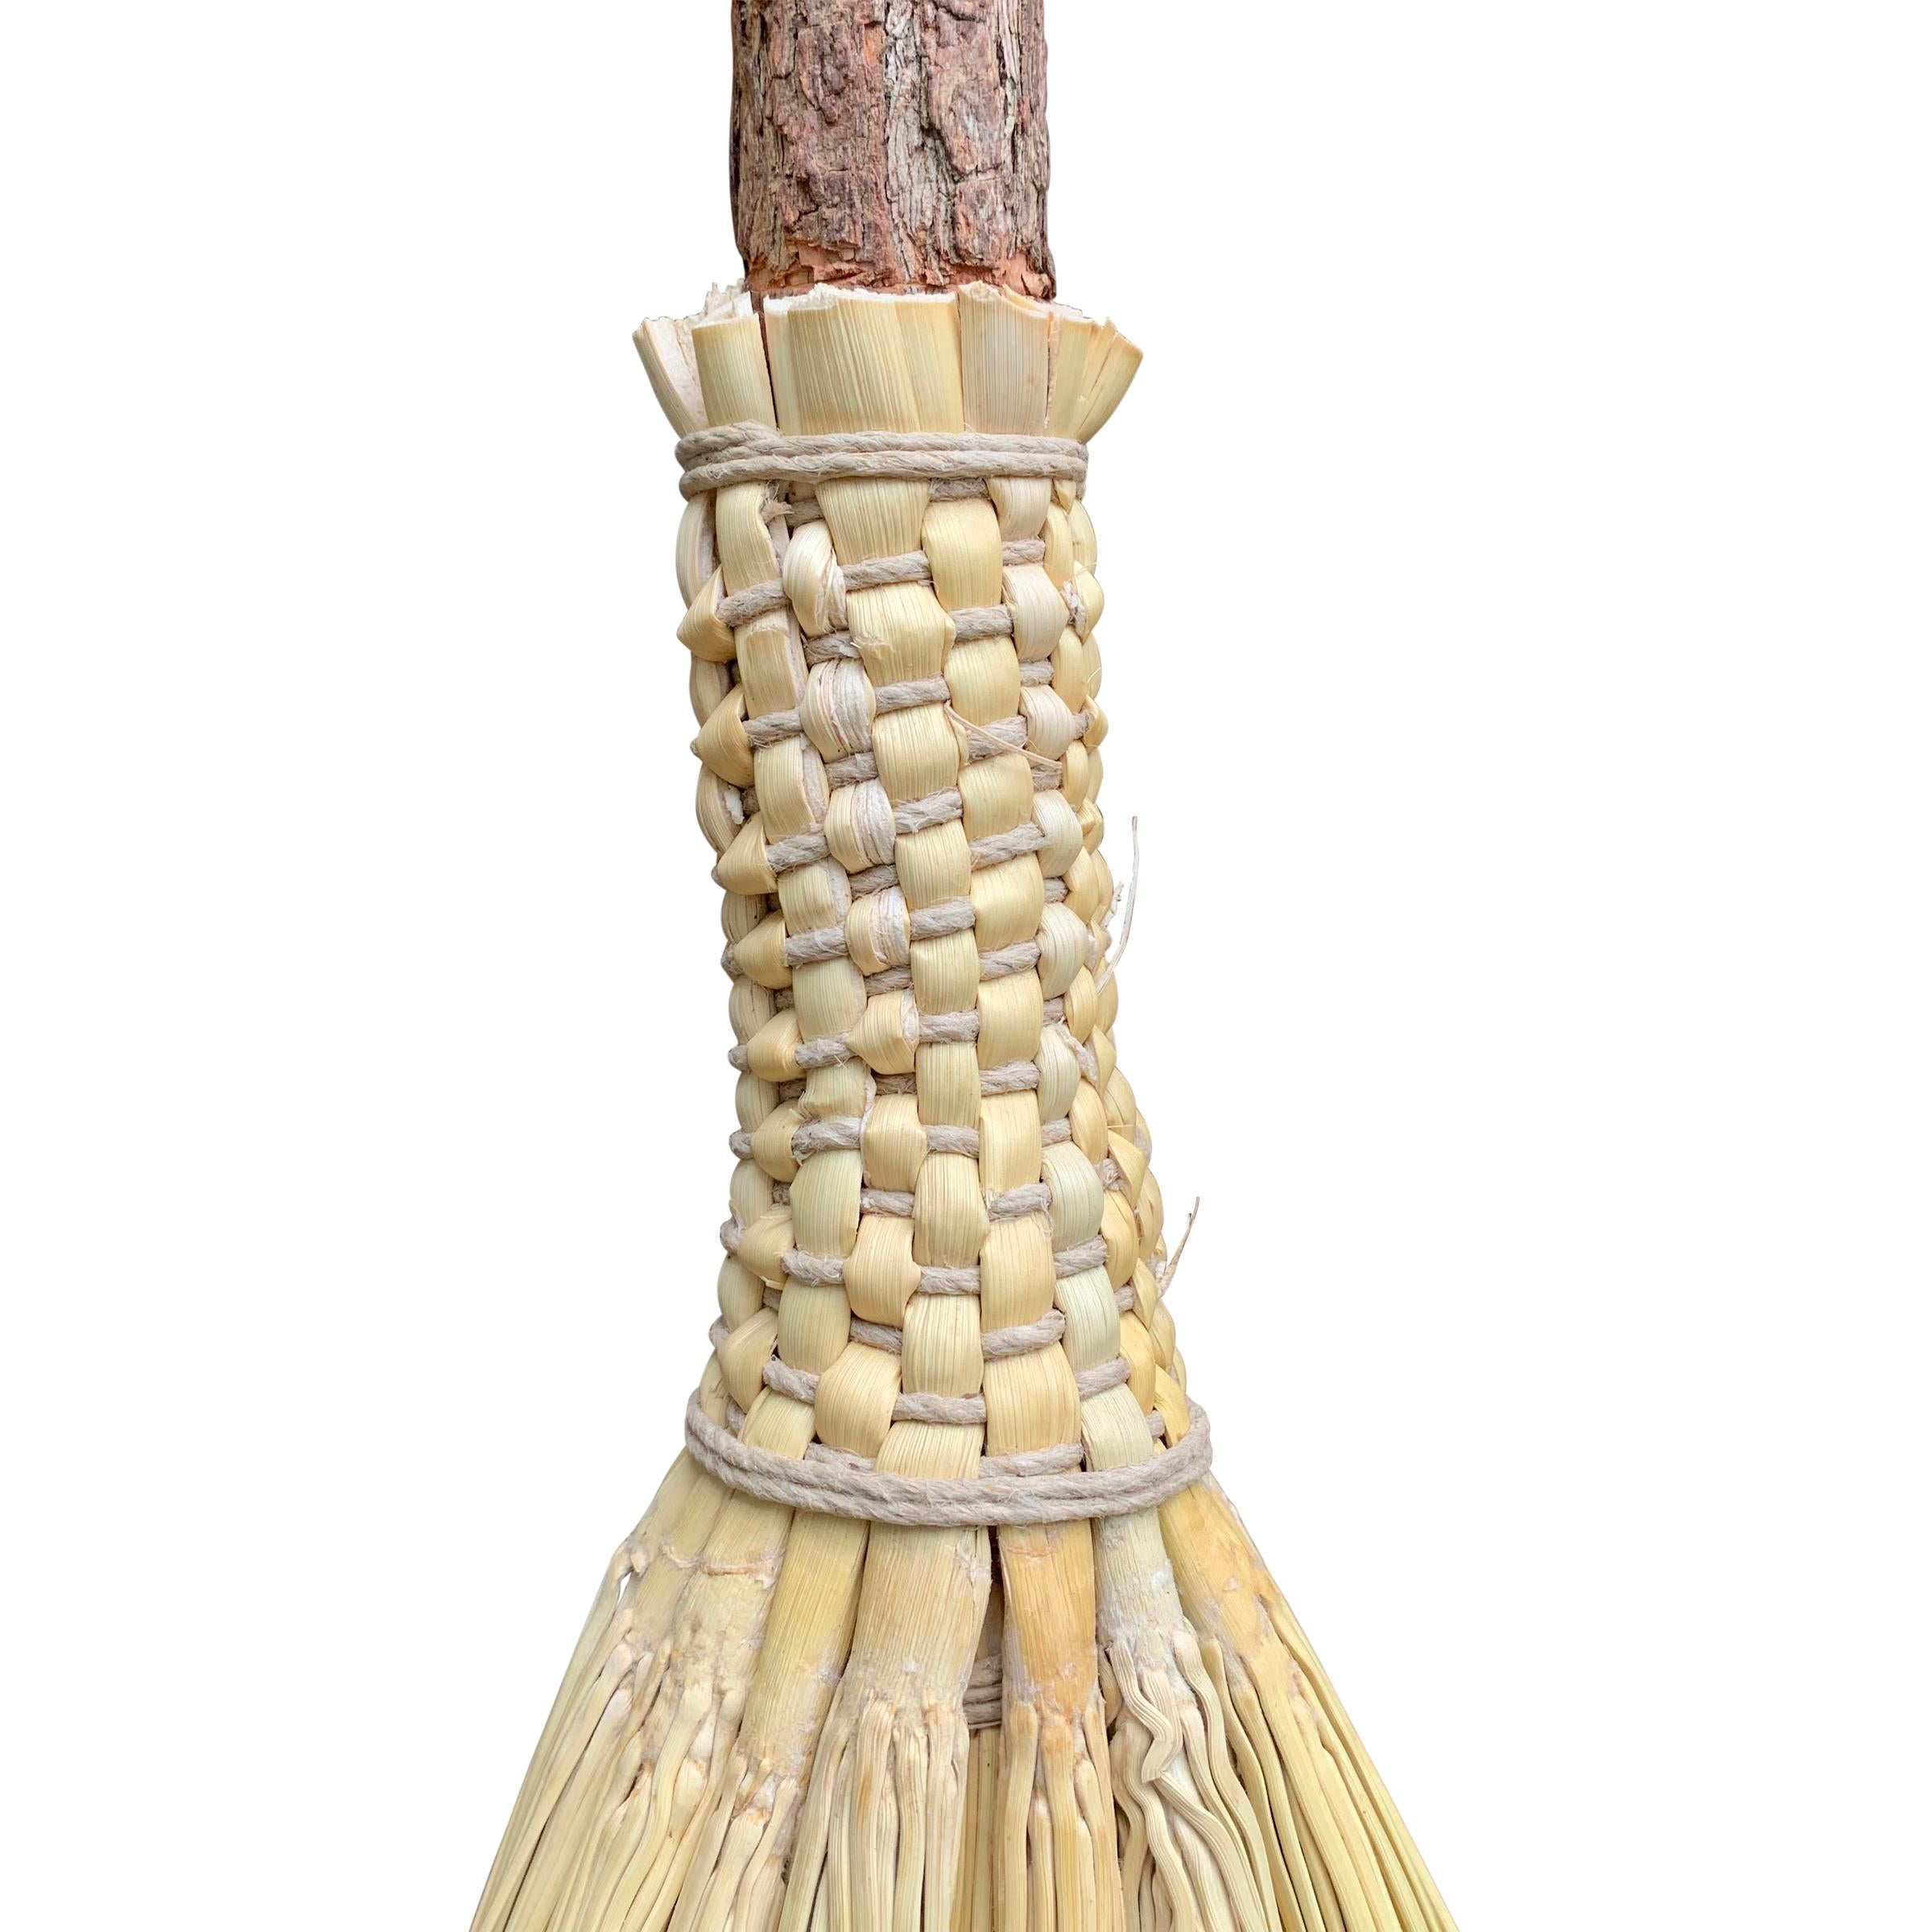 Handmade by artisans in rural Kentucky, our Right Proper broom was crafted with Shaker design principles in mind: “Don't make something unless it is both necessary and useful; and if it is both necessary and useful, then make it beautiful.” Each has